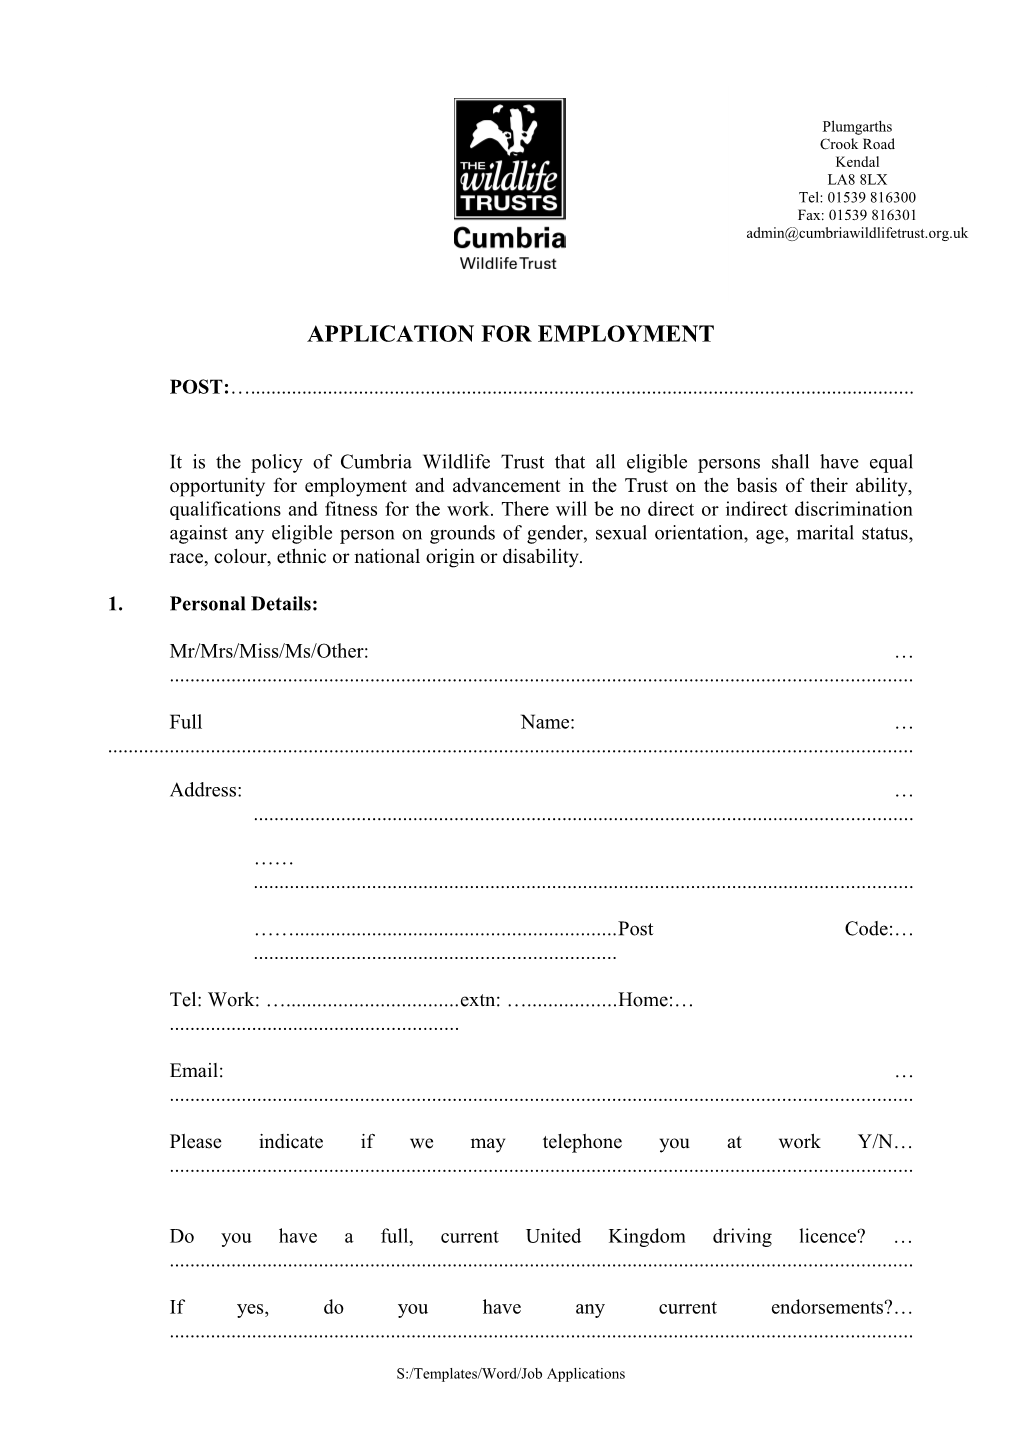 Application for Employment Post: